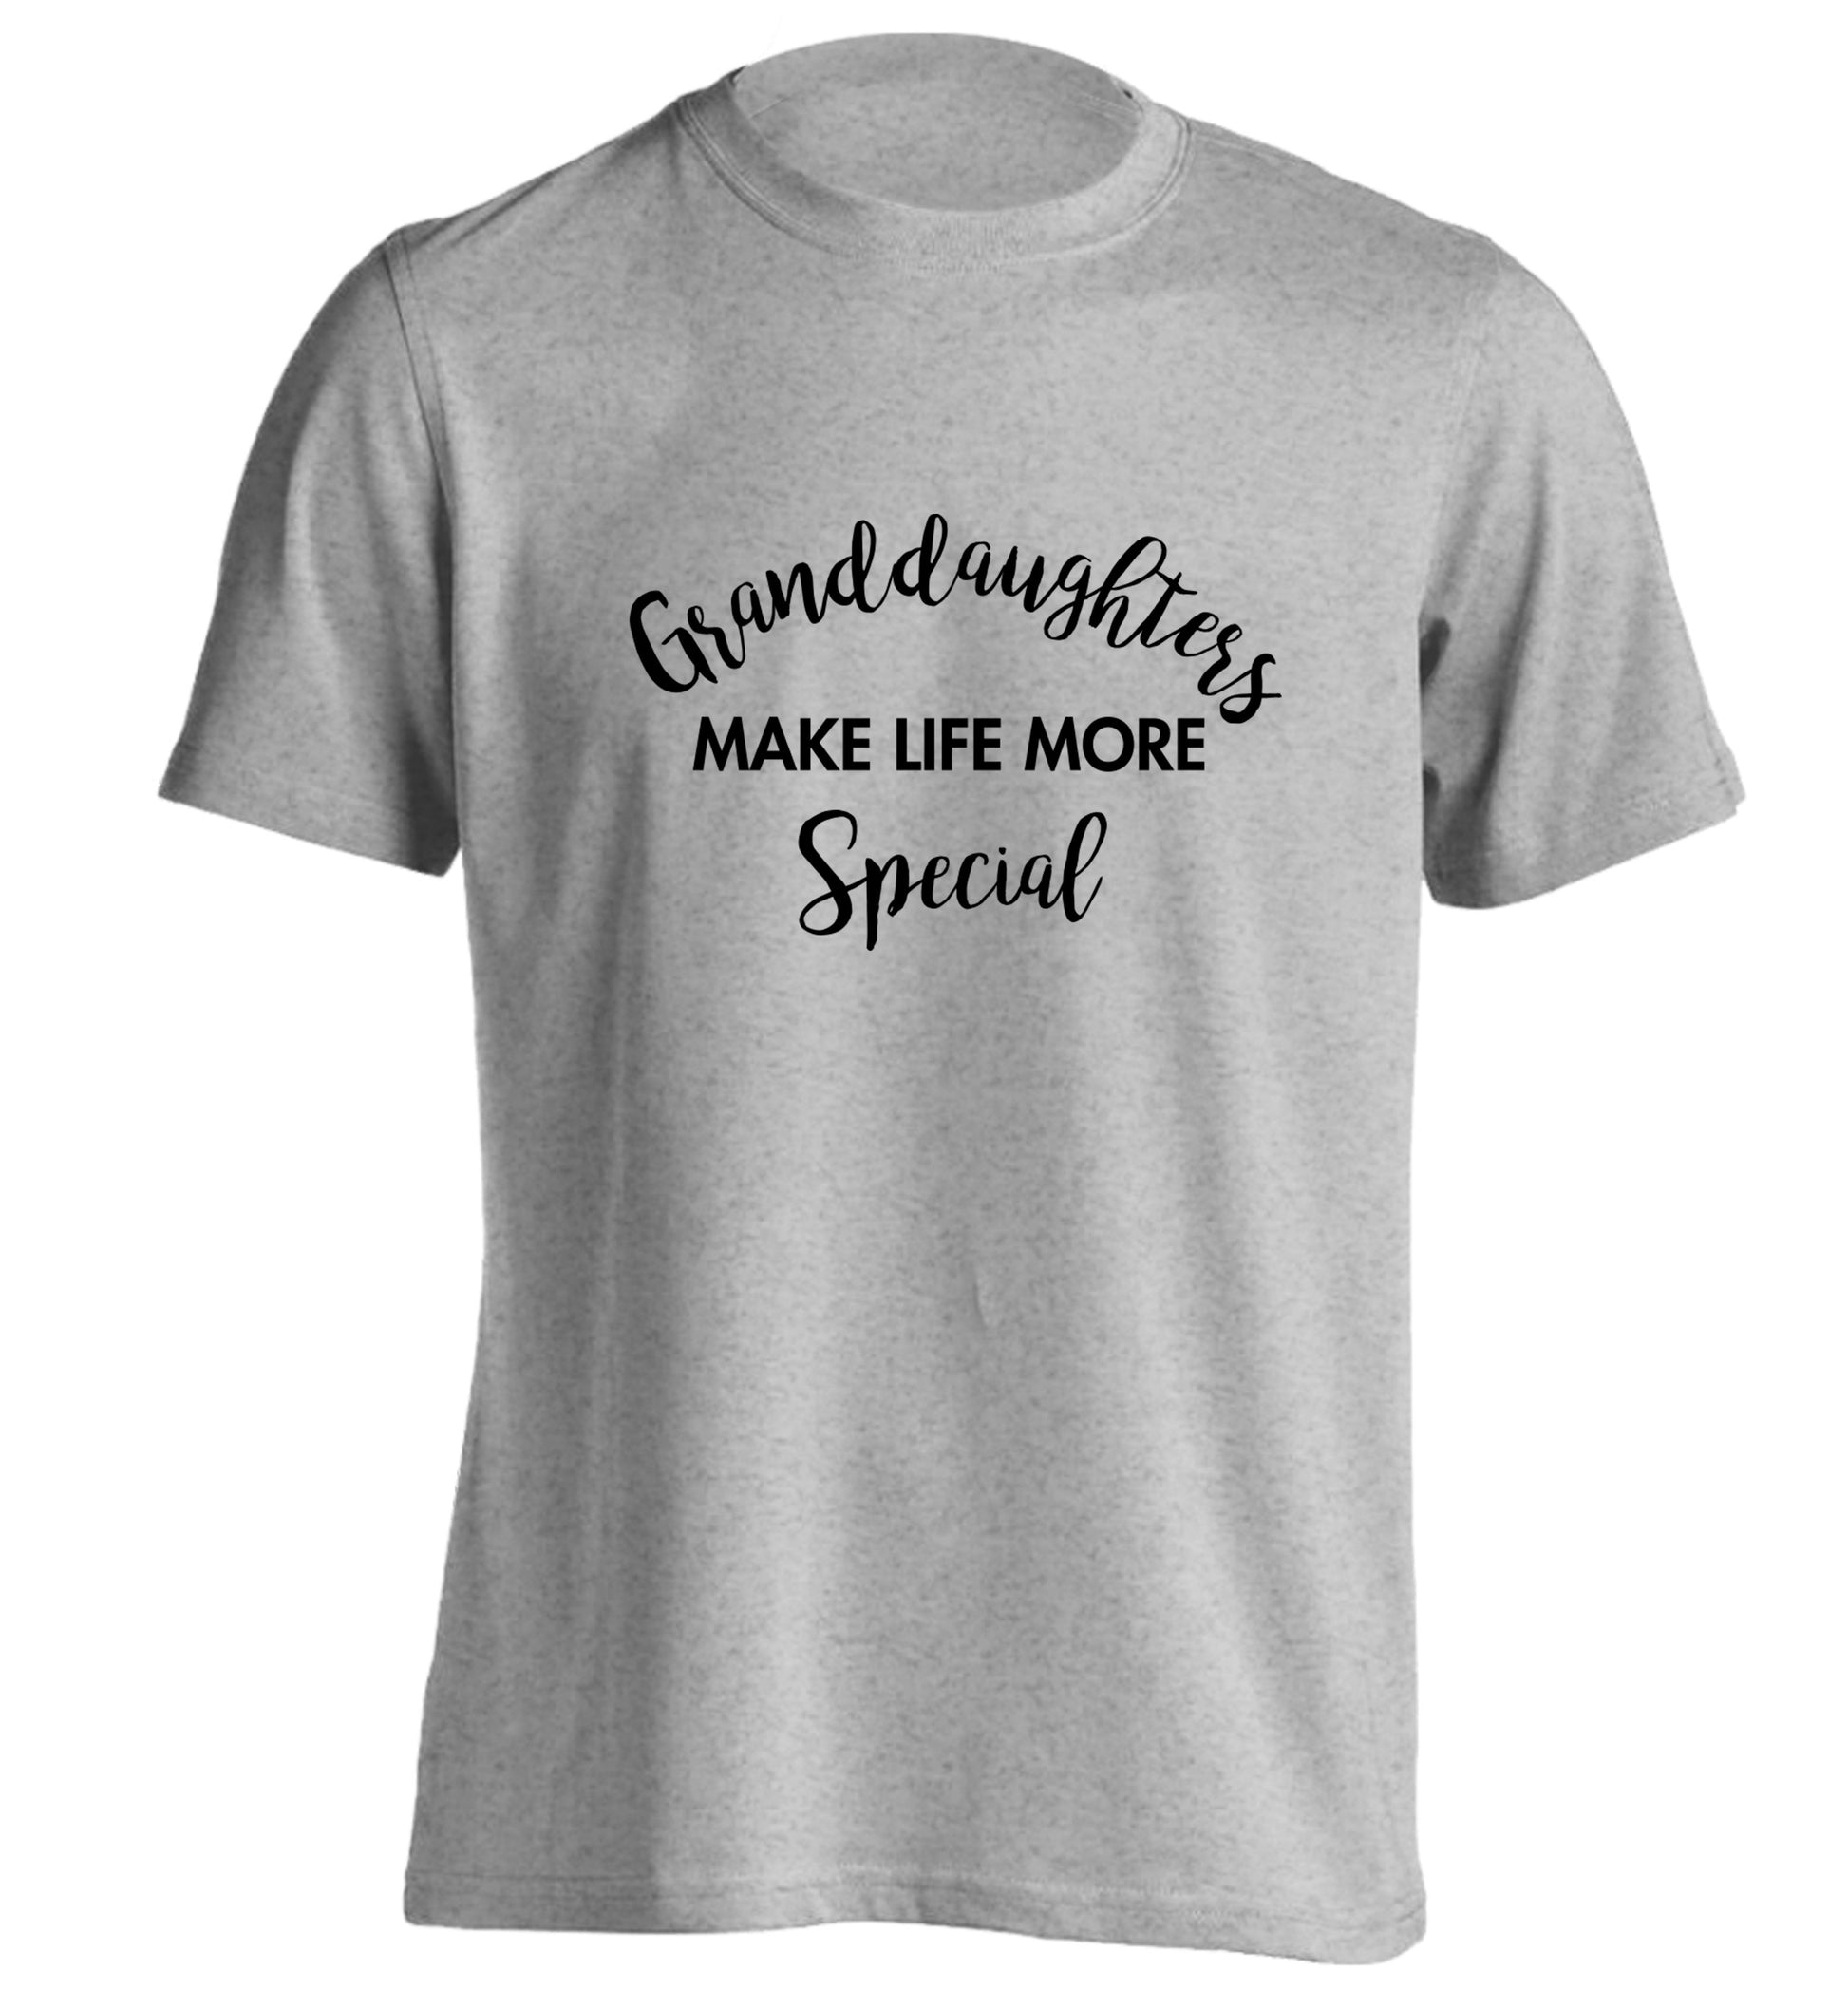 Granddaughters make life more special adults unisex grey Tshirt 2XL